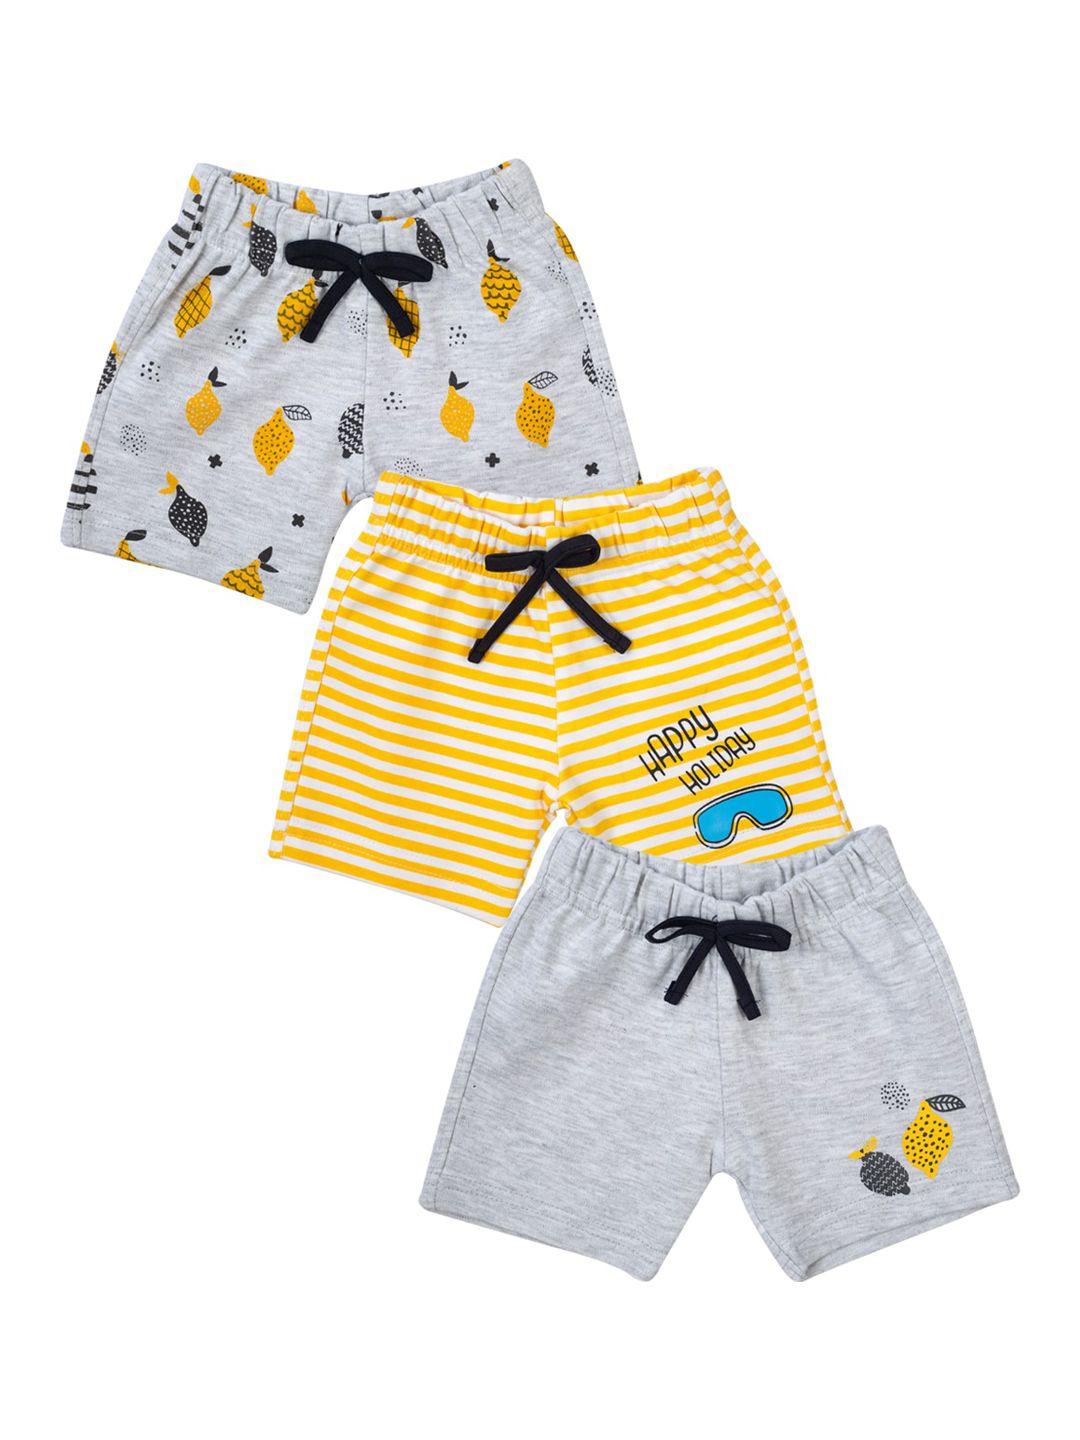 meemee boys yellow pack of 3 striped mid-rise regular shorts